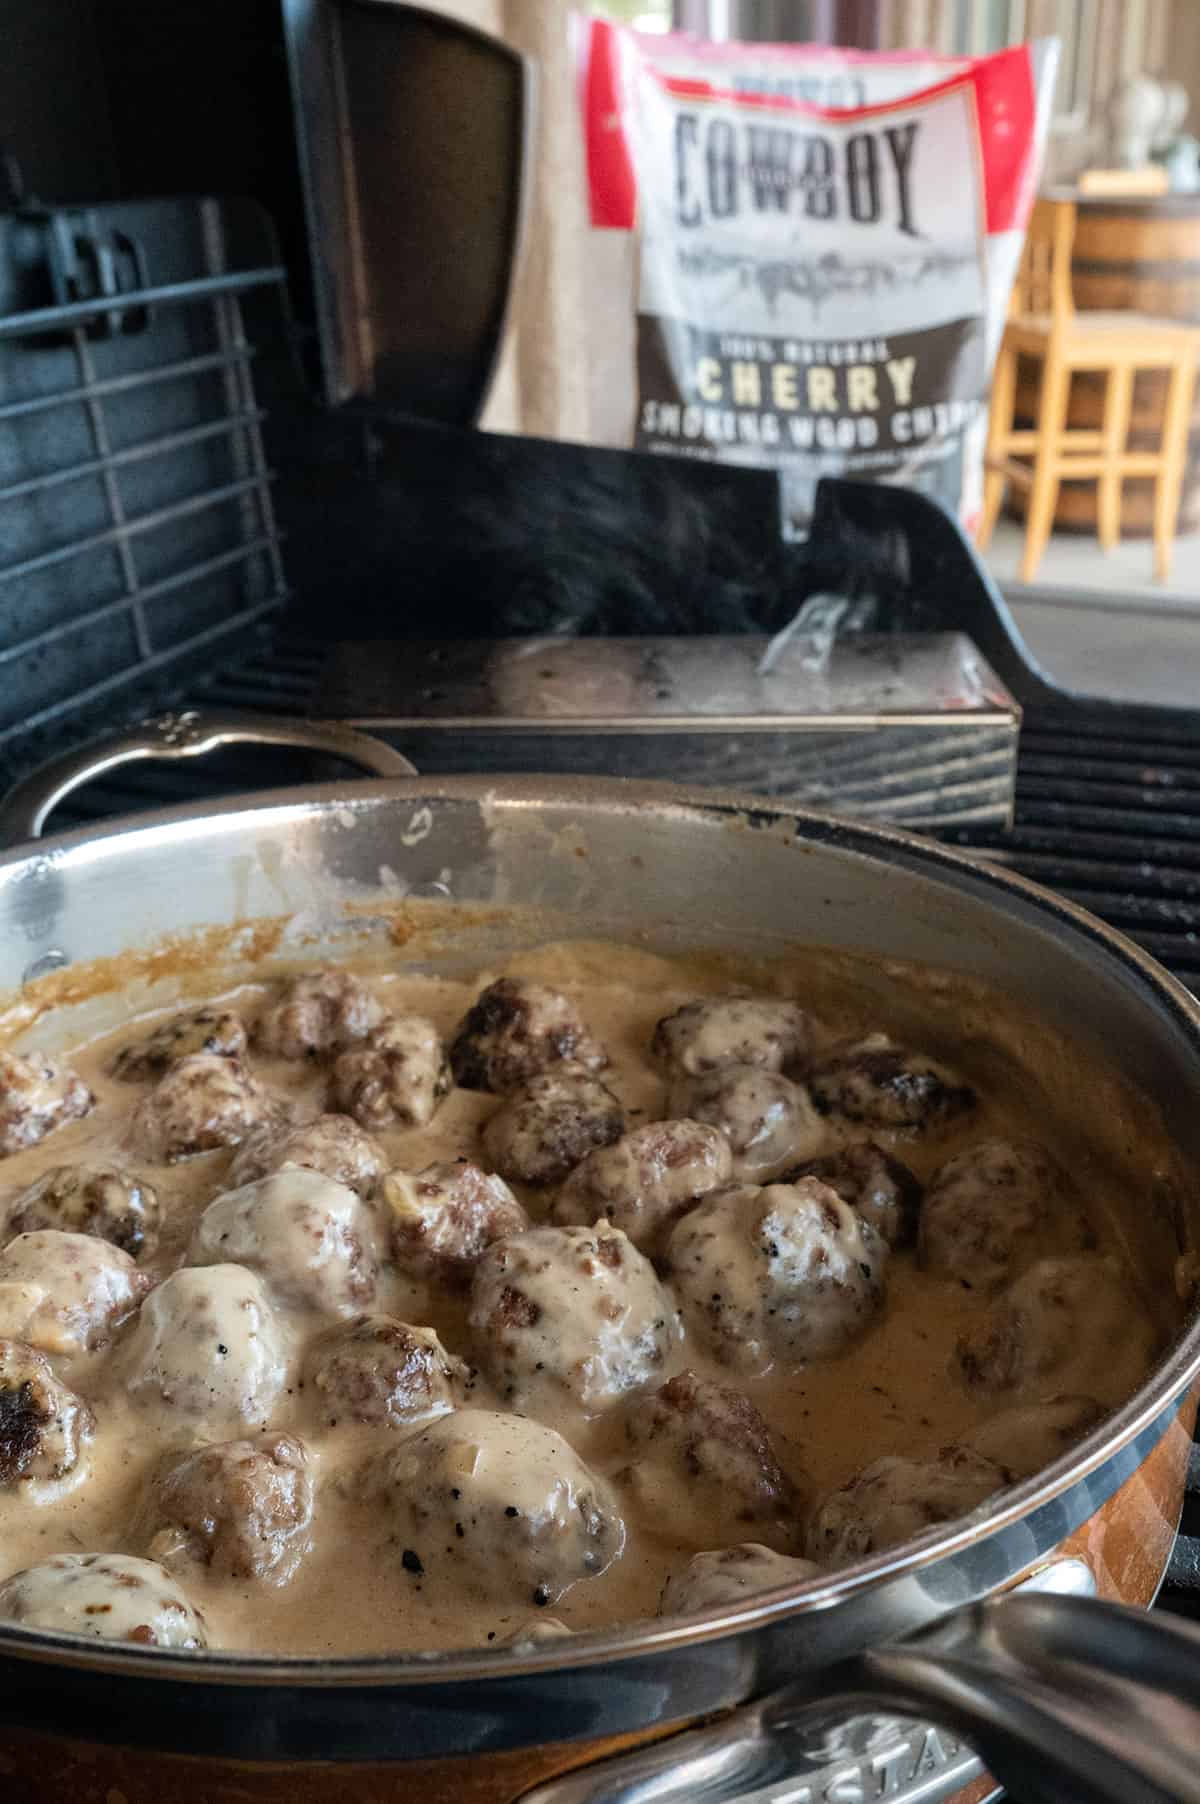 meatballs simmering in creamy sauce on grill.